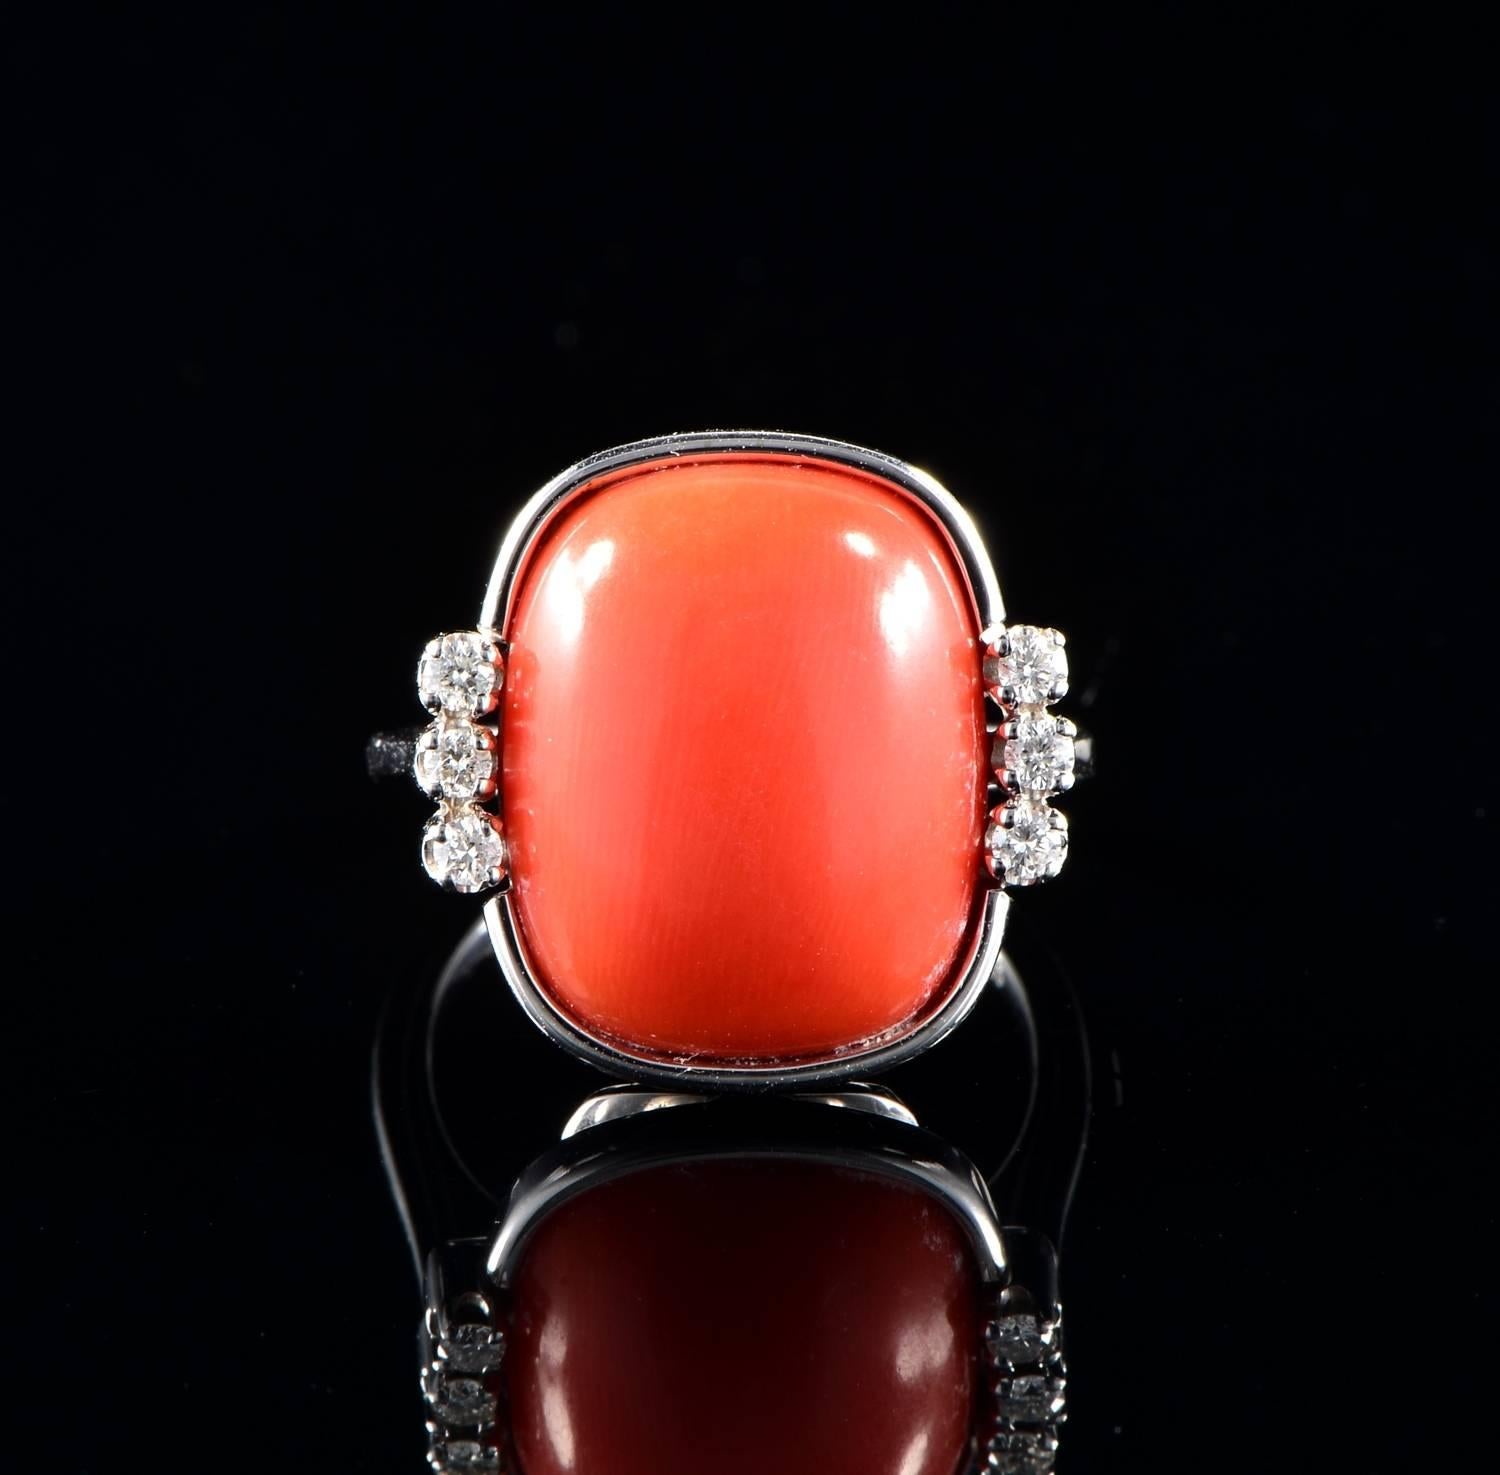 Italian origin

Individually hand crafted of solid 18 Kt white gold

The ring is of charming simple design made to exalt the beauty of the Natural Large Cabochon of Coral of very pleasing red tomato colour not treated or tinted, measures 17 mm. x 15